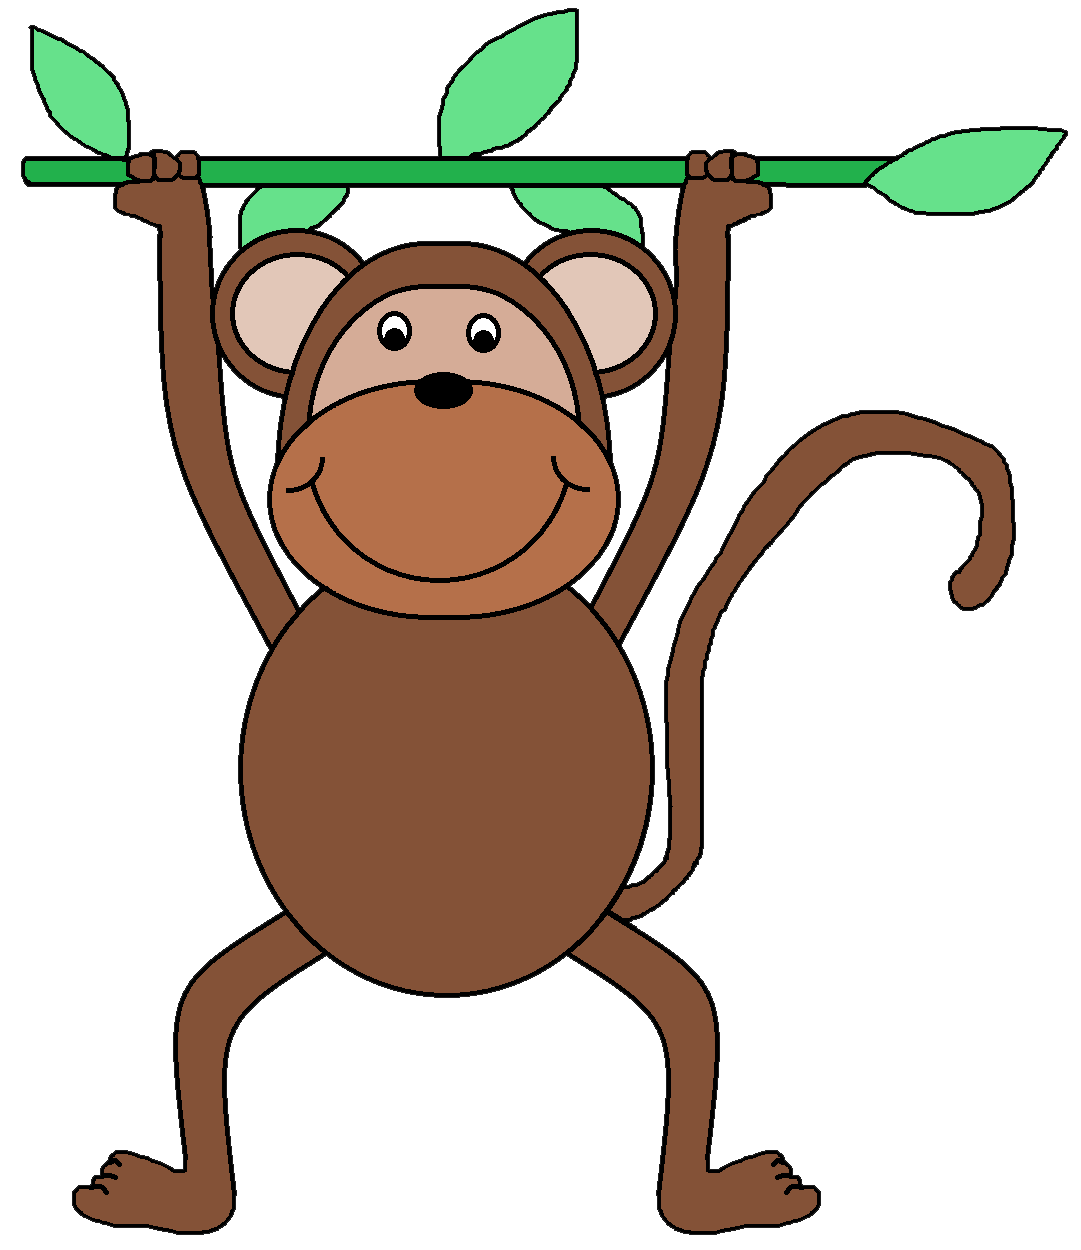 Displaying monkey face clipart clipartmonk free clip art images